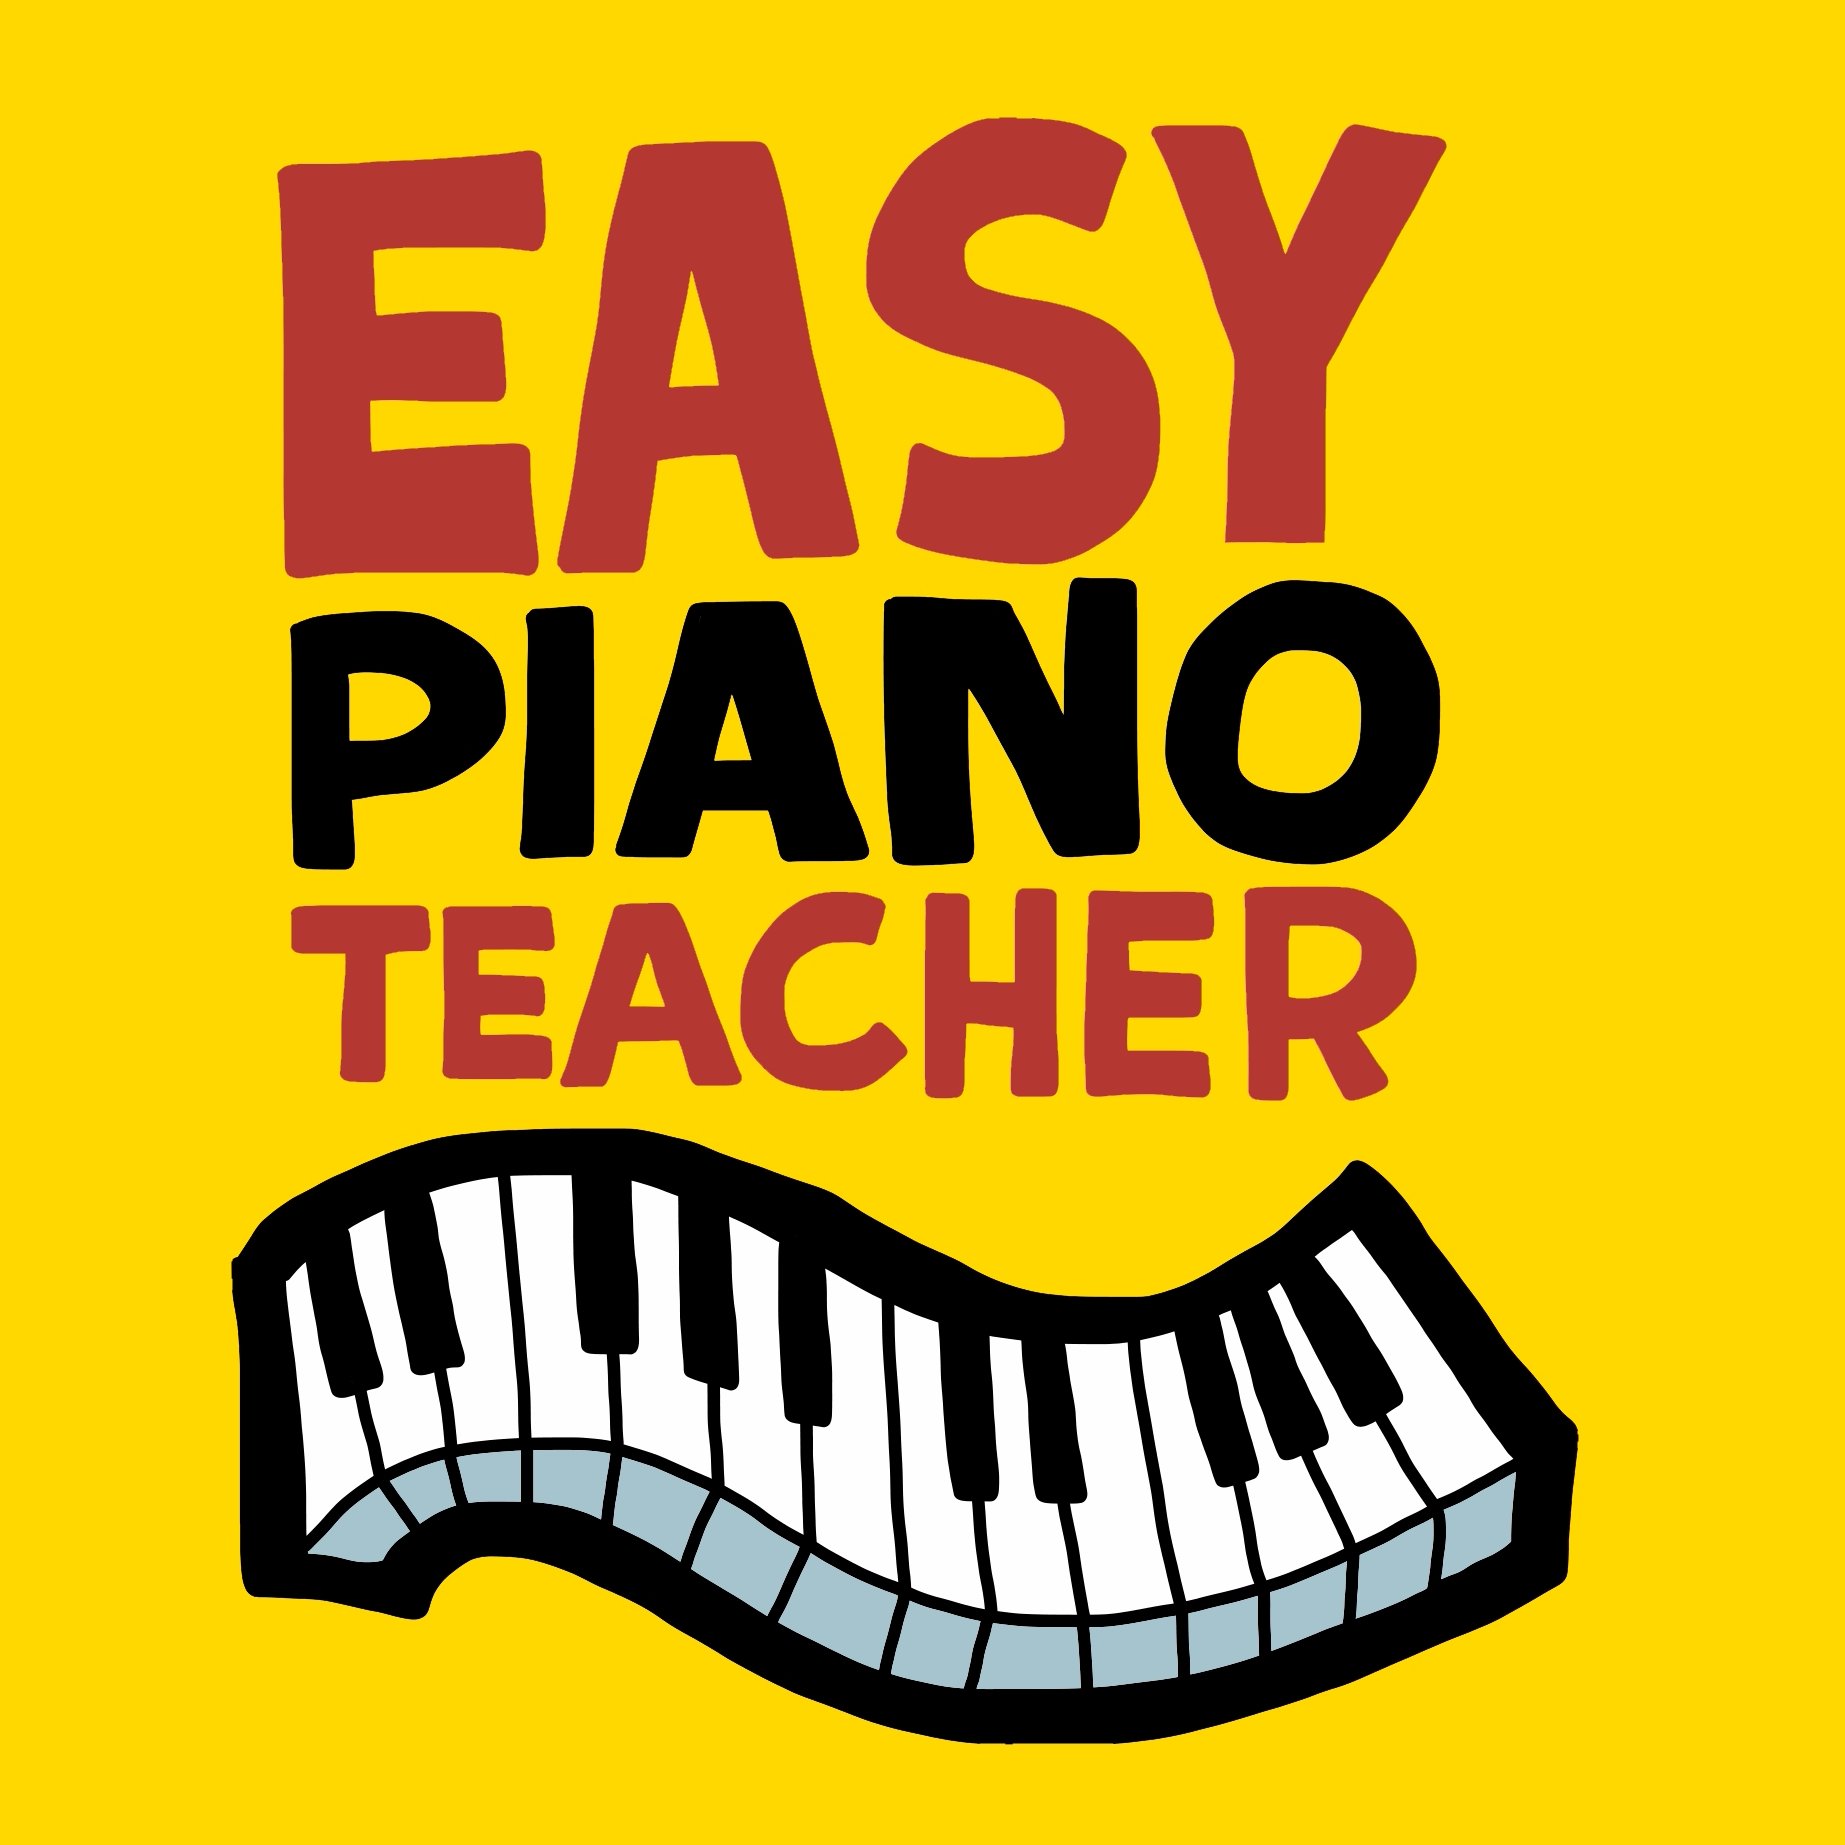 Want to play piano or keyboard? Free, easy, step-by-step 